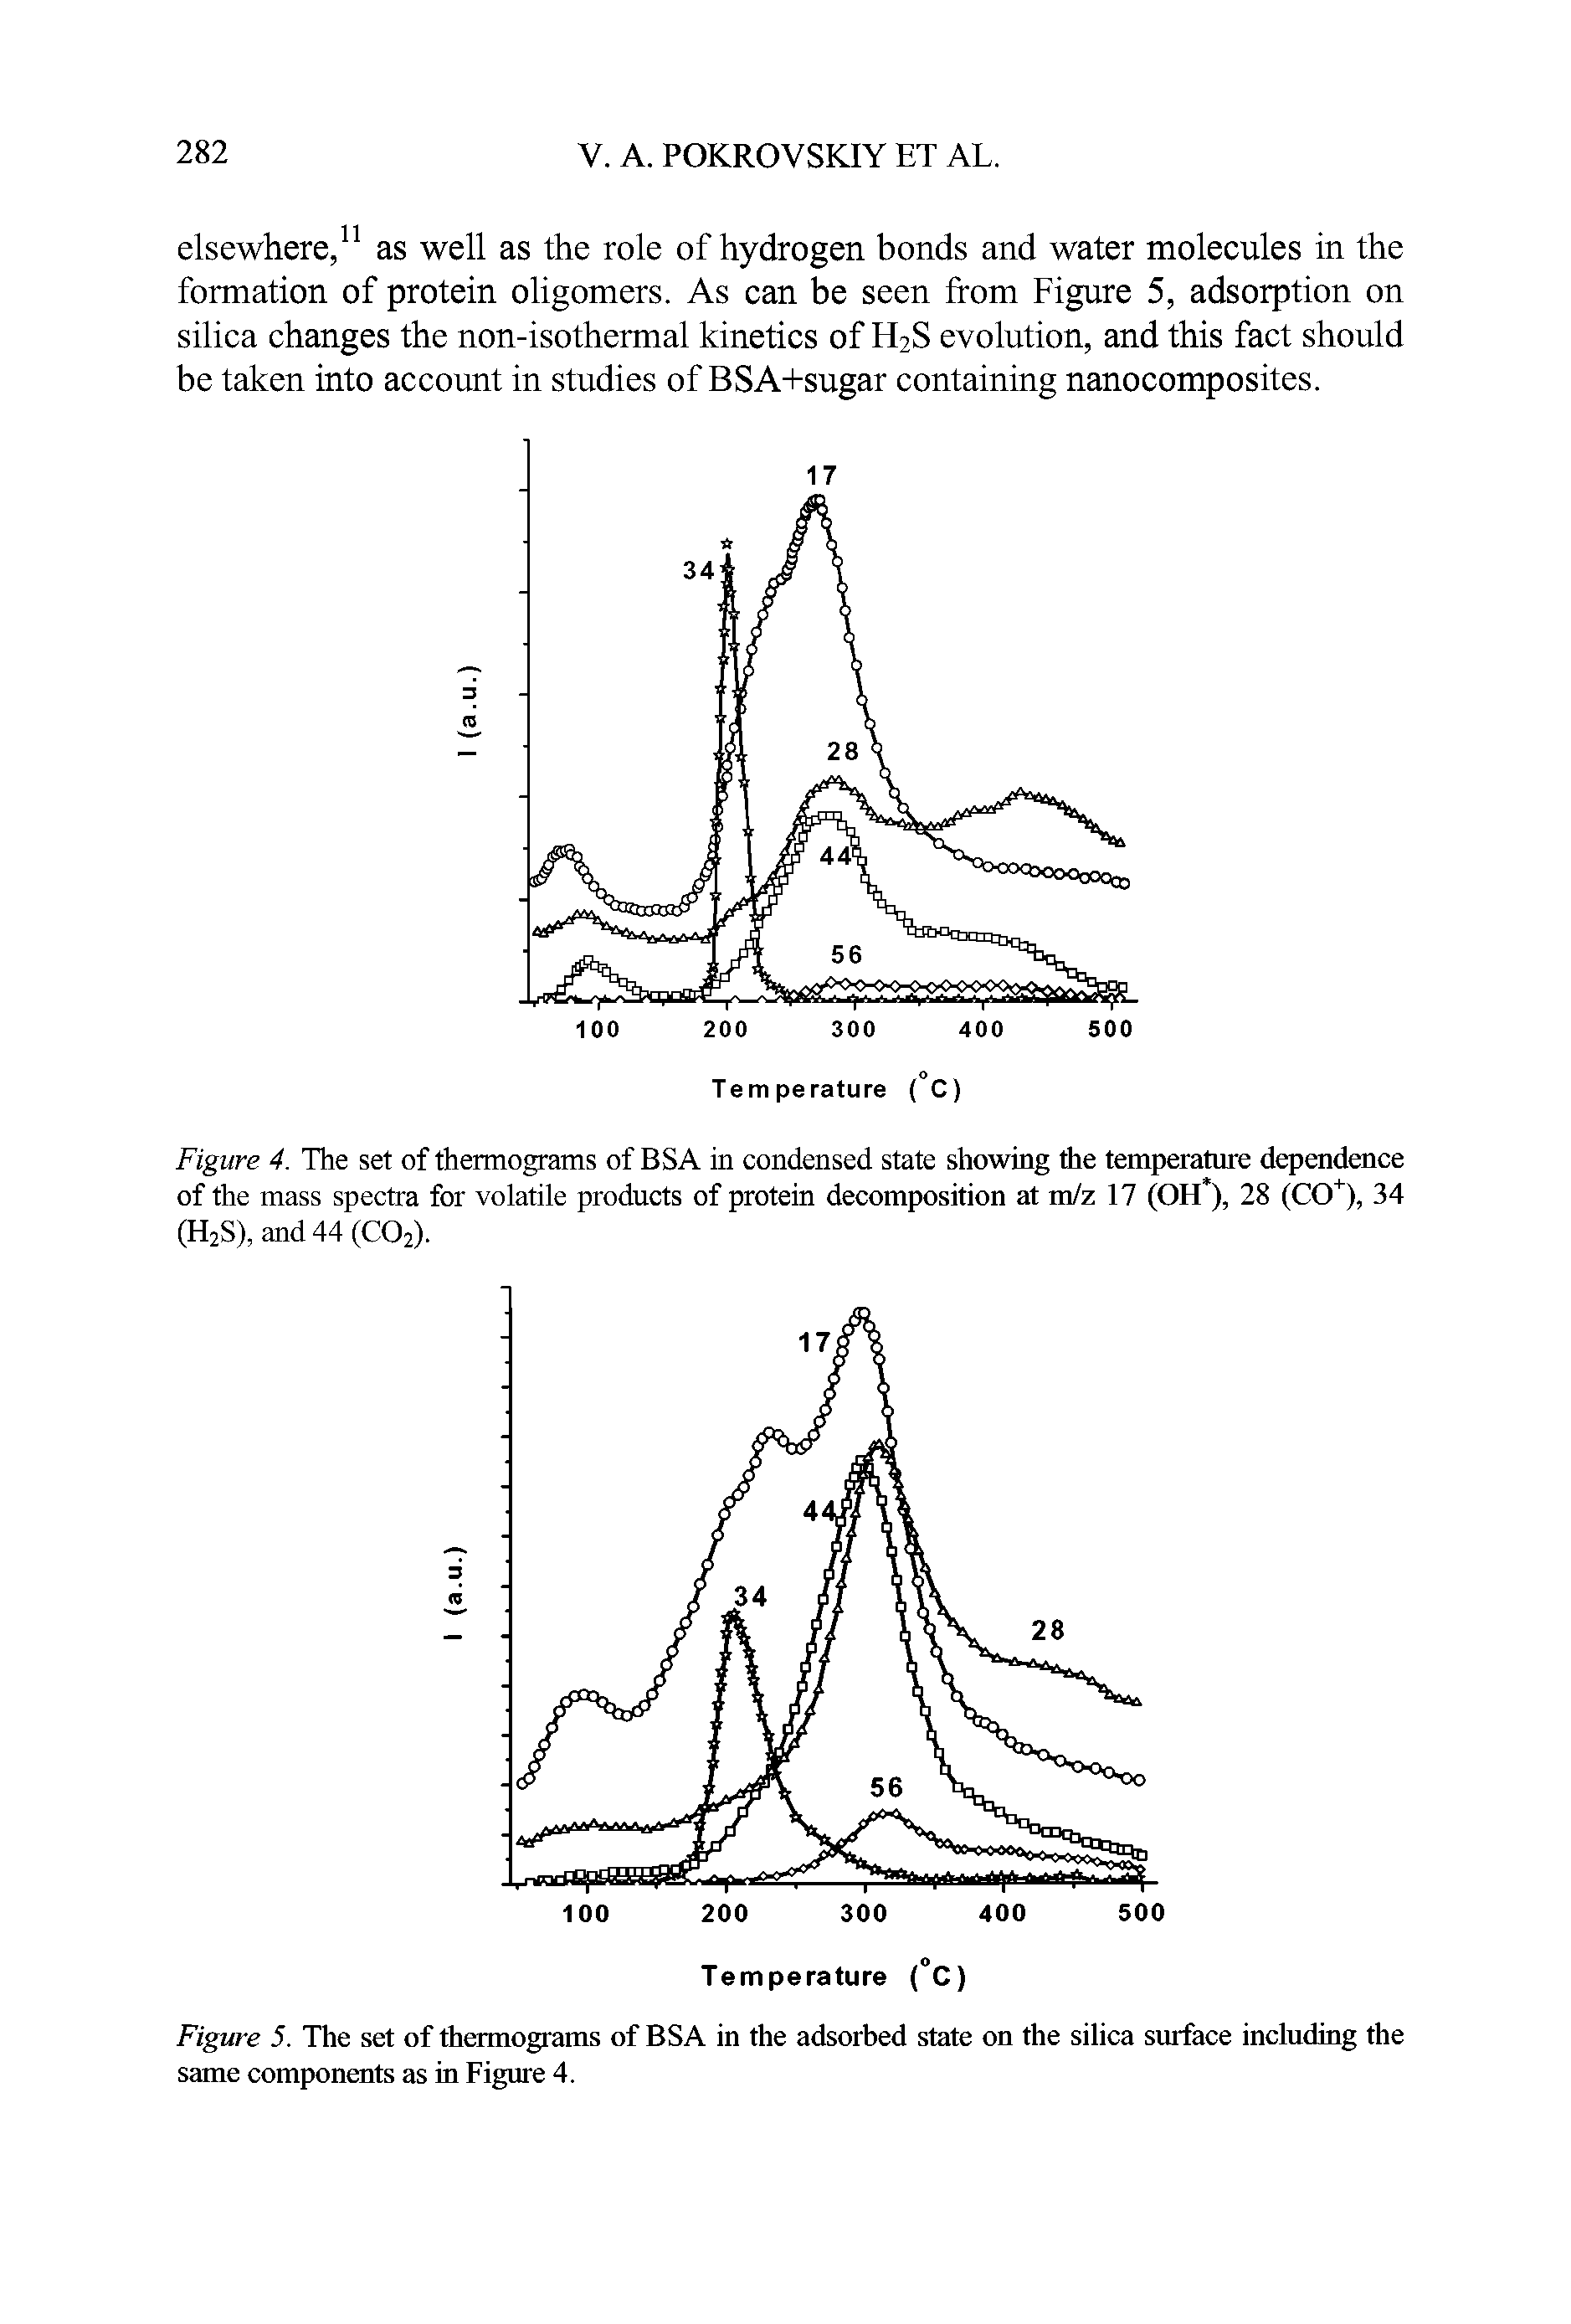 Figure 4. The set of thermograms of BSA in condensed state showing the temperature dependence of the mass spectra for volatile products of protein decomposition at m/z 17 (OH ), 28 (CO+), 34 (H2S),and44(C02).